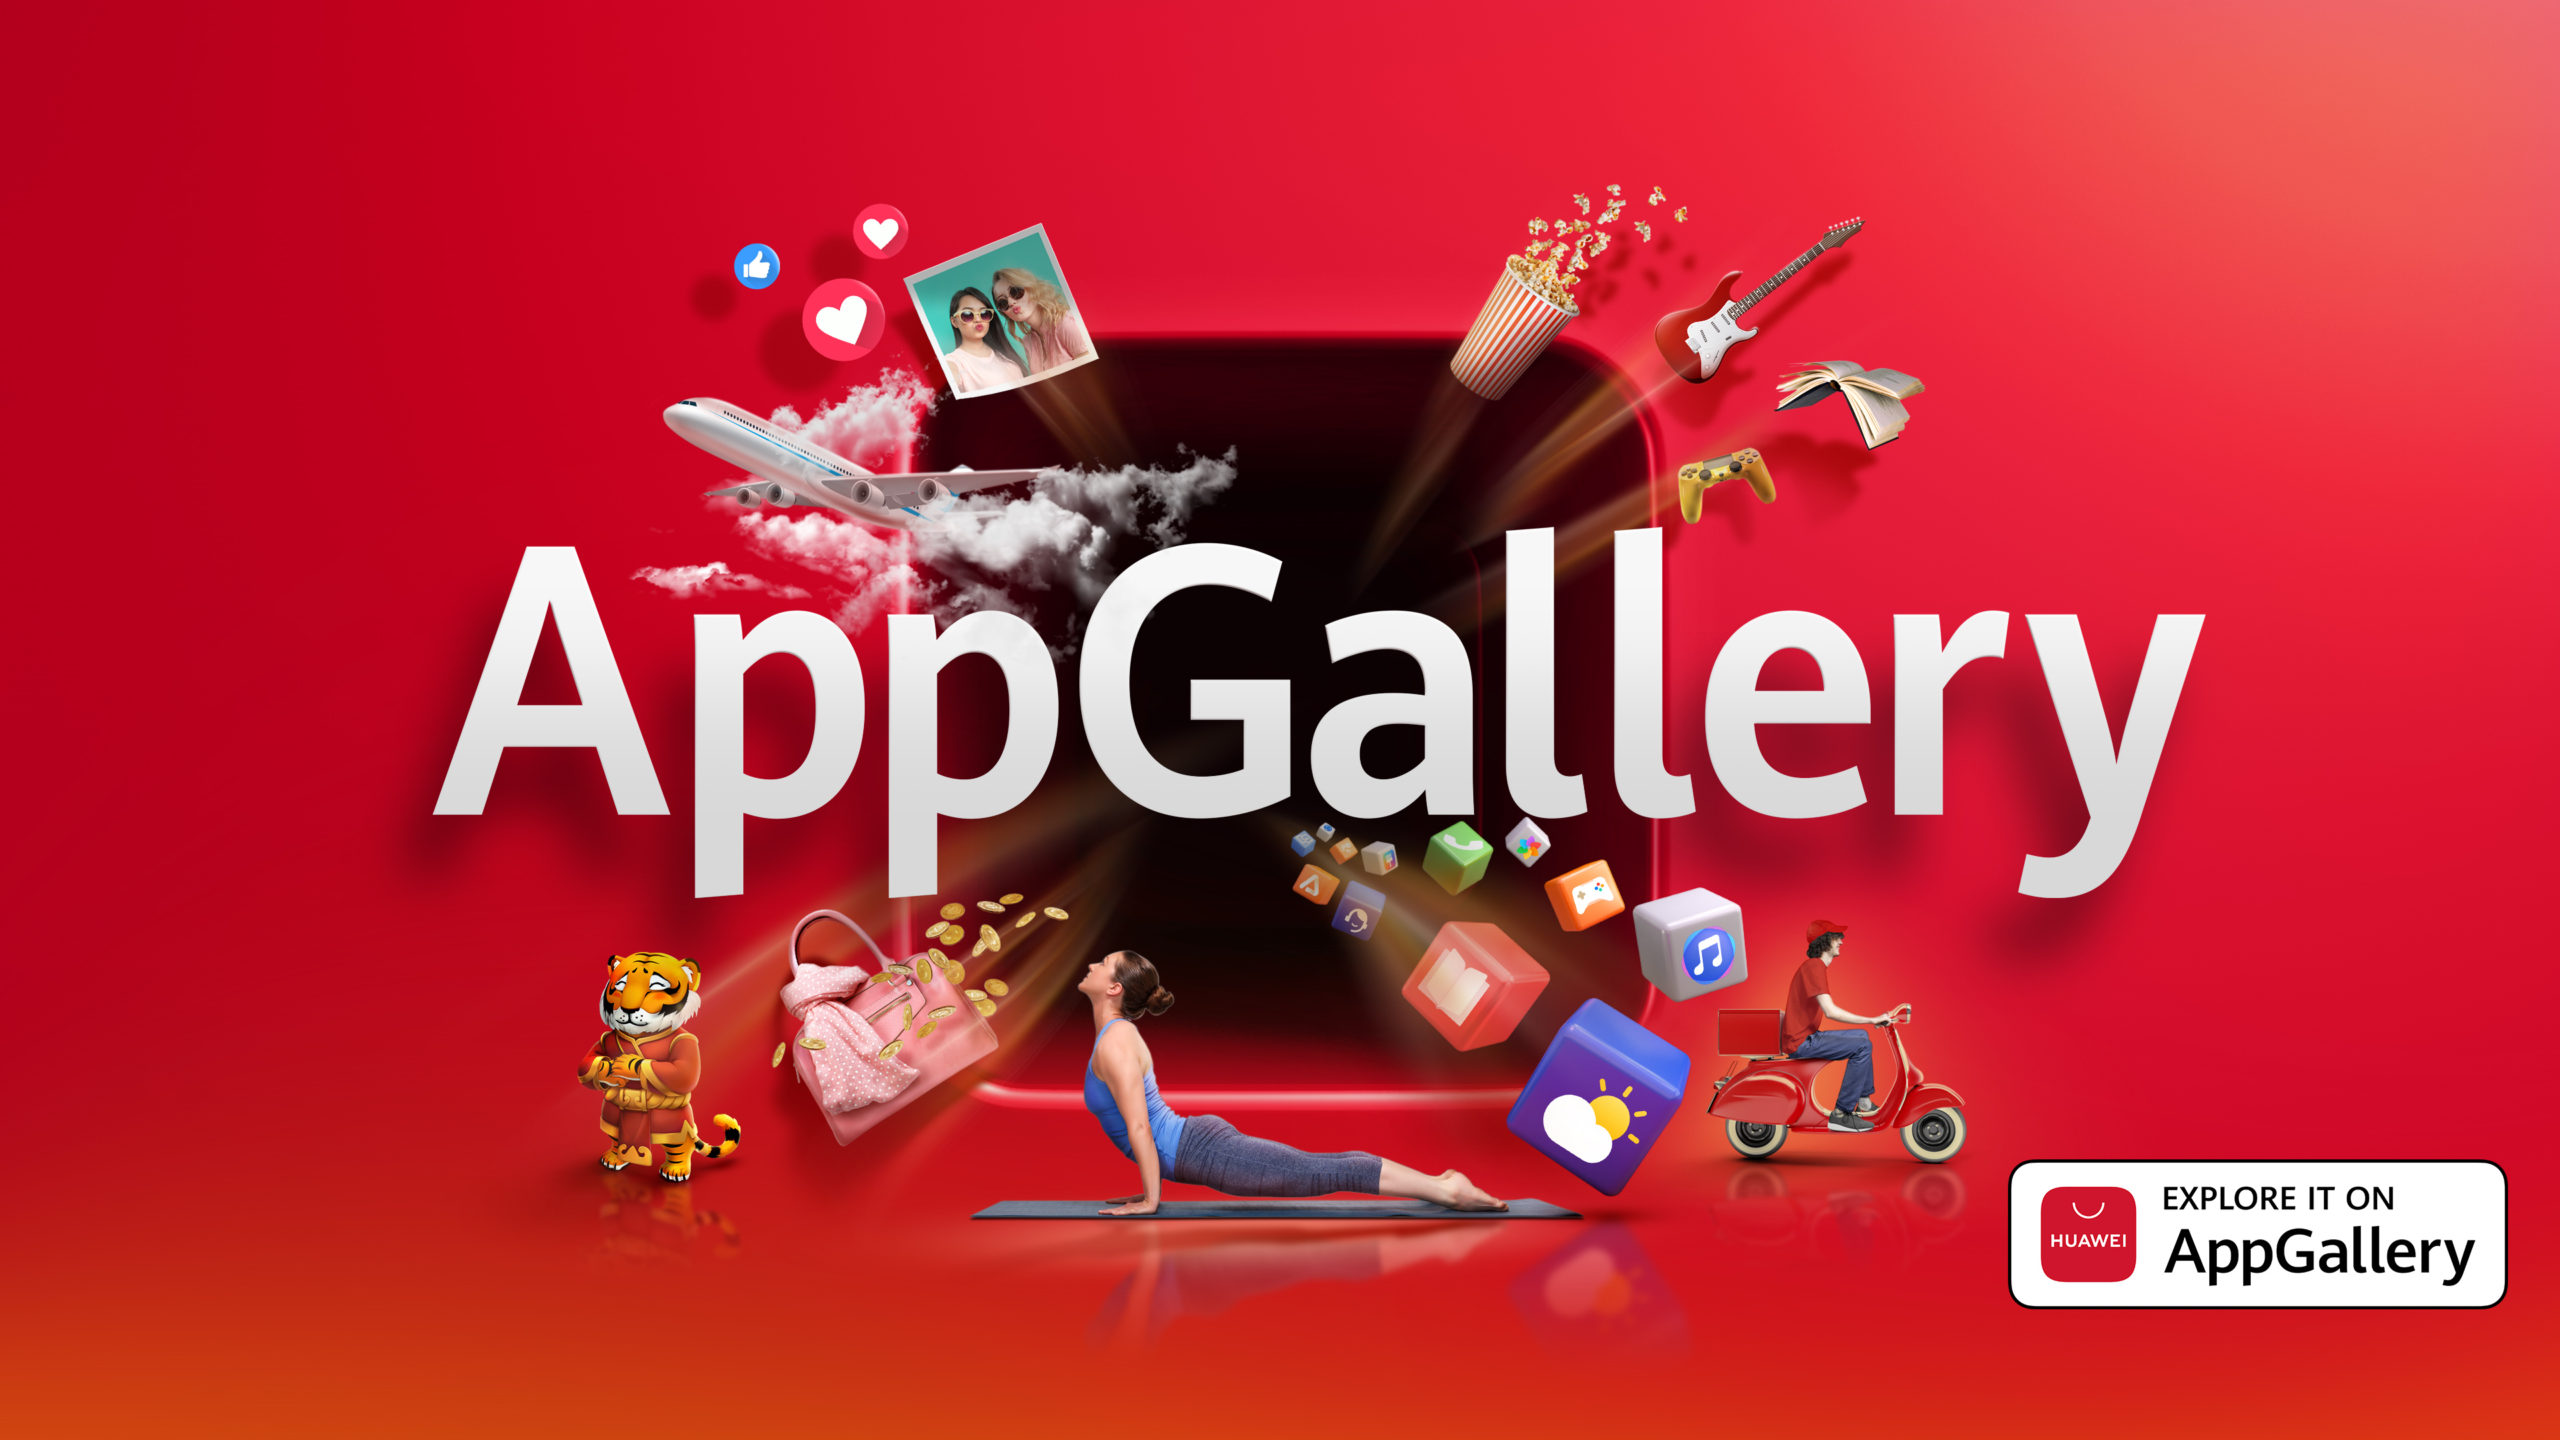 Image for Huawei Launches The HUAWEI AppGallery, One Of The Top Three App Distribution Platforms